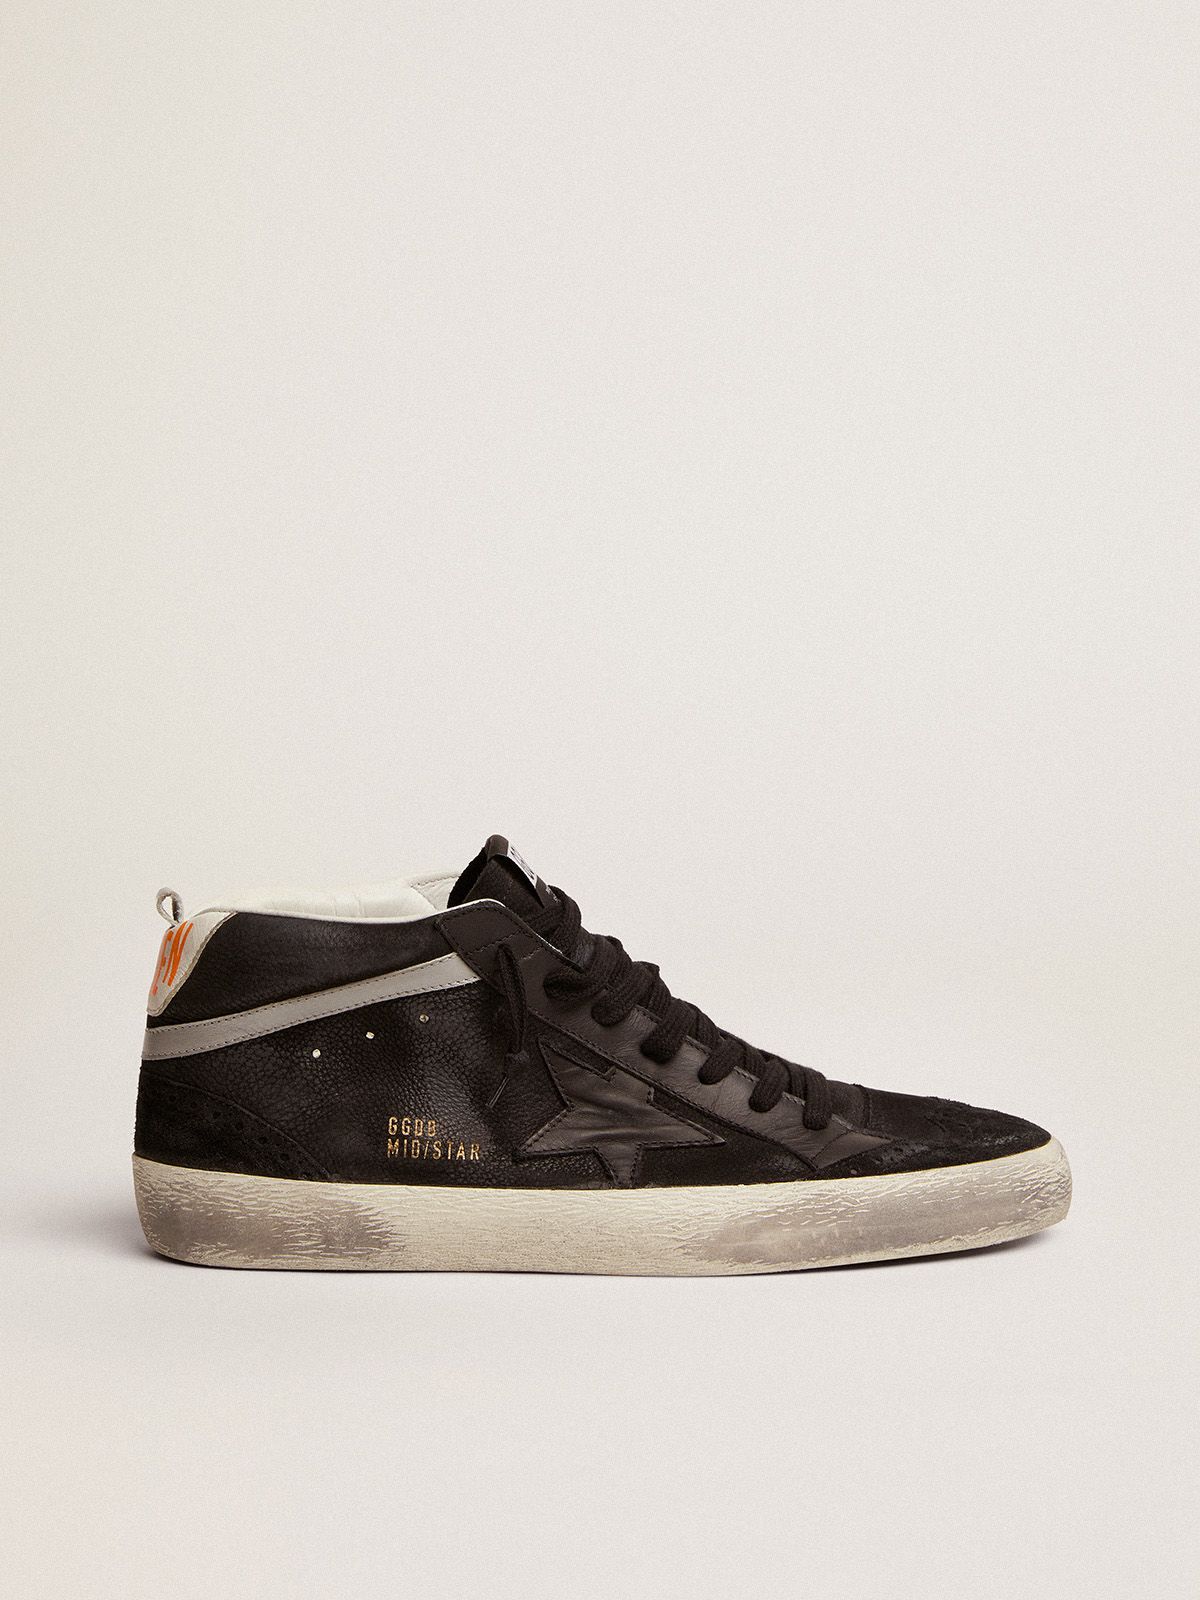 golden goose with Star and in sneakers Mid star flash nubuck silver black laminated leather